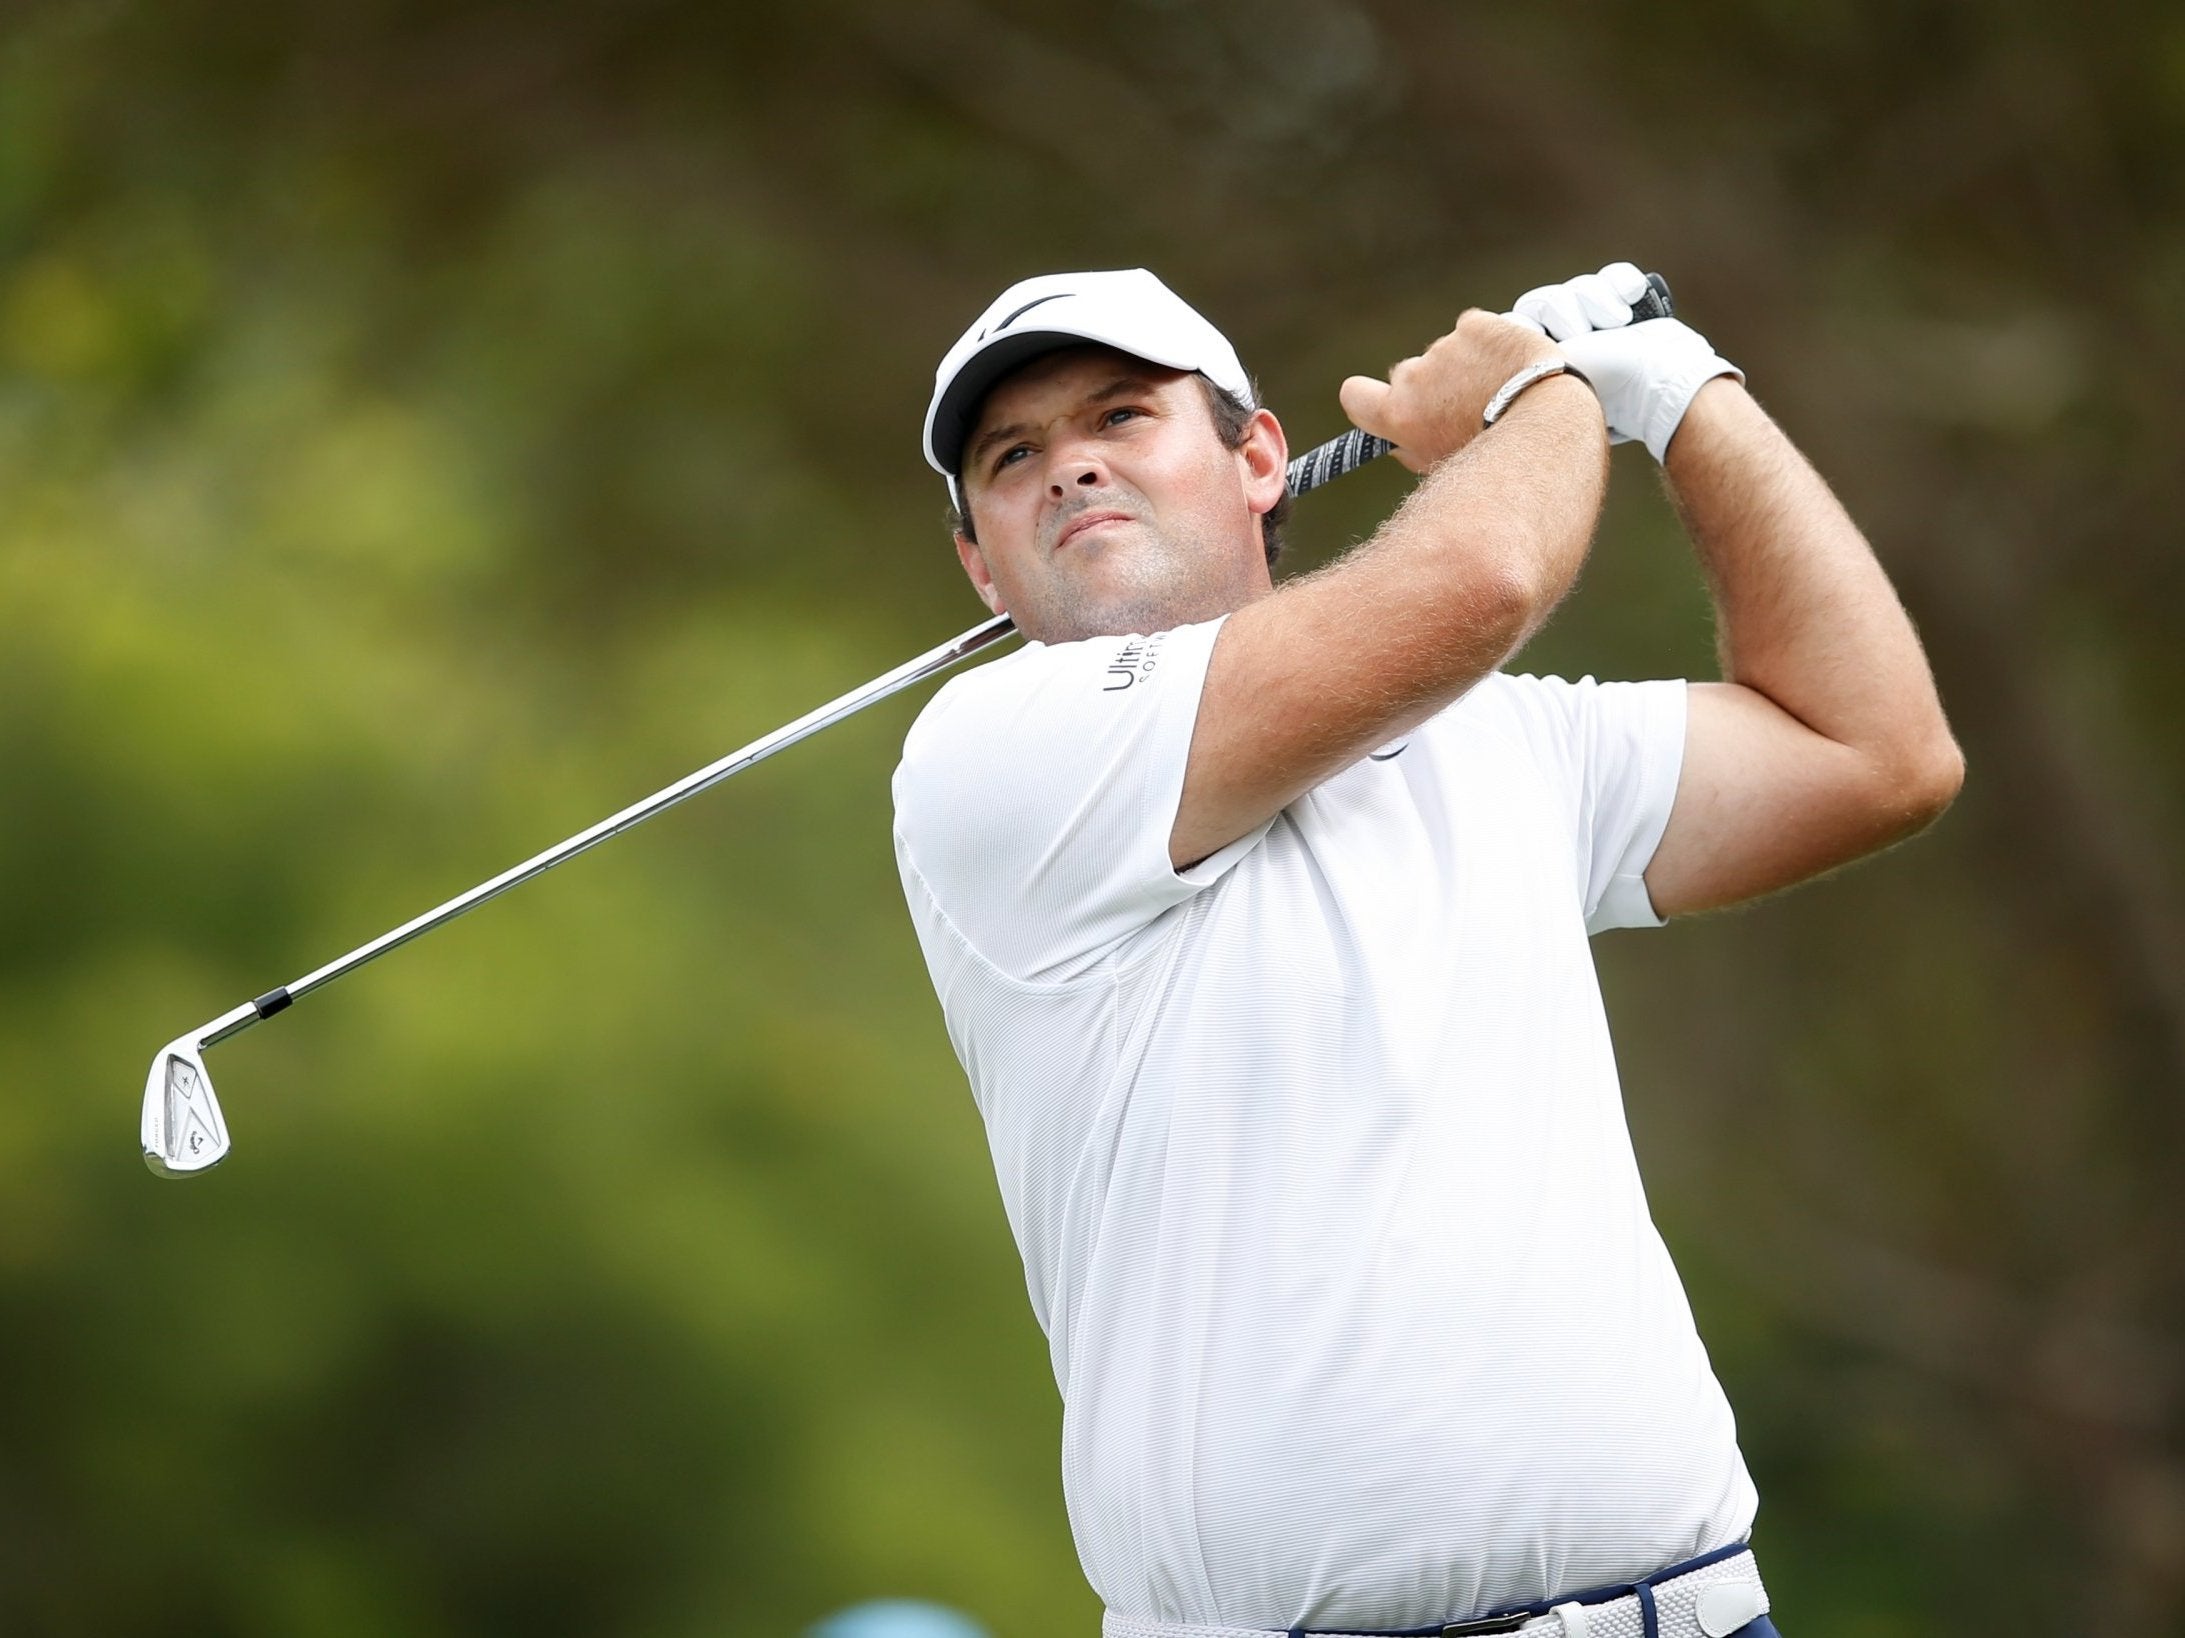 Patrick Reed shot a 5-under par 67 to move into a share of the lead